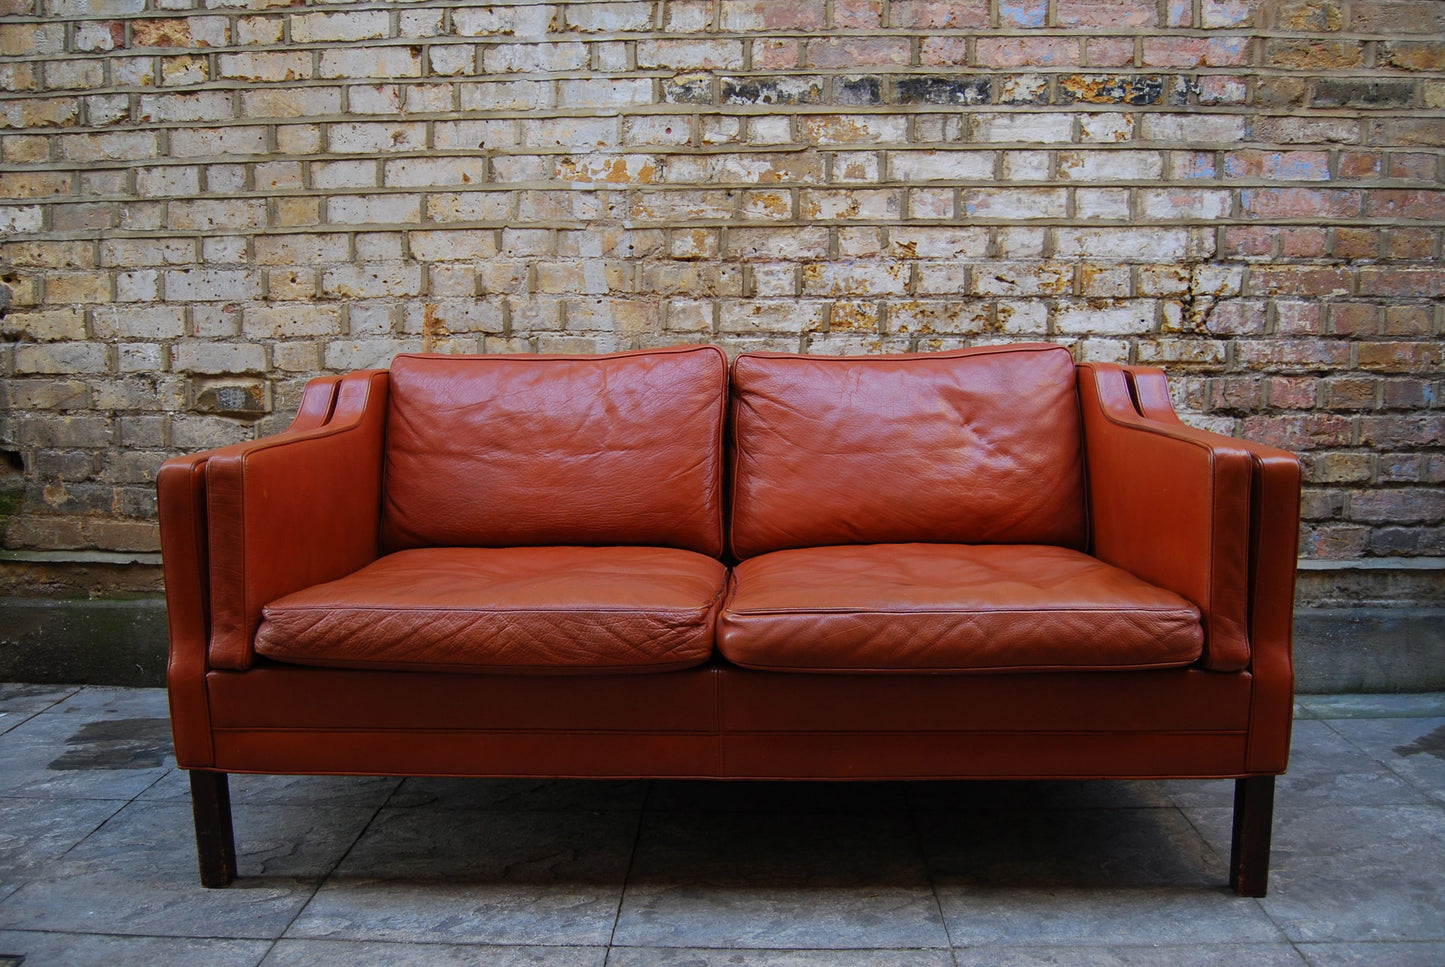 Two seat leather sofa in style of Mogensen